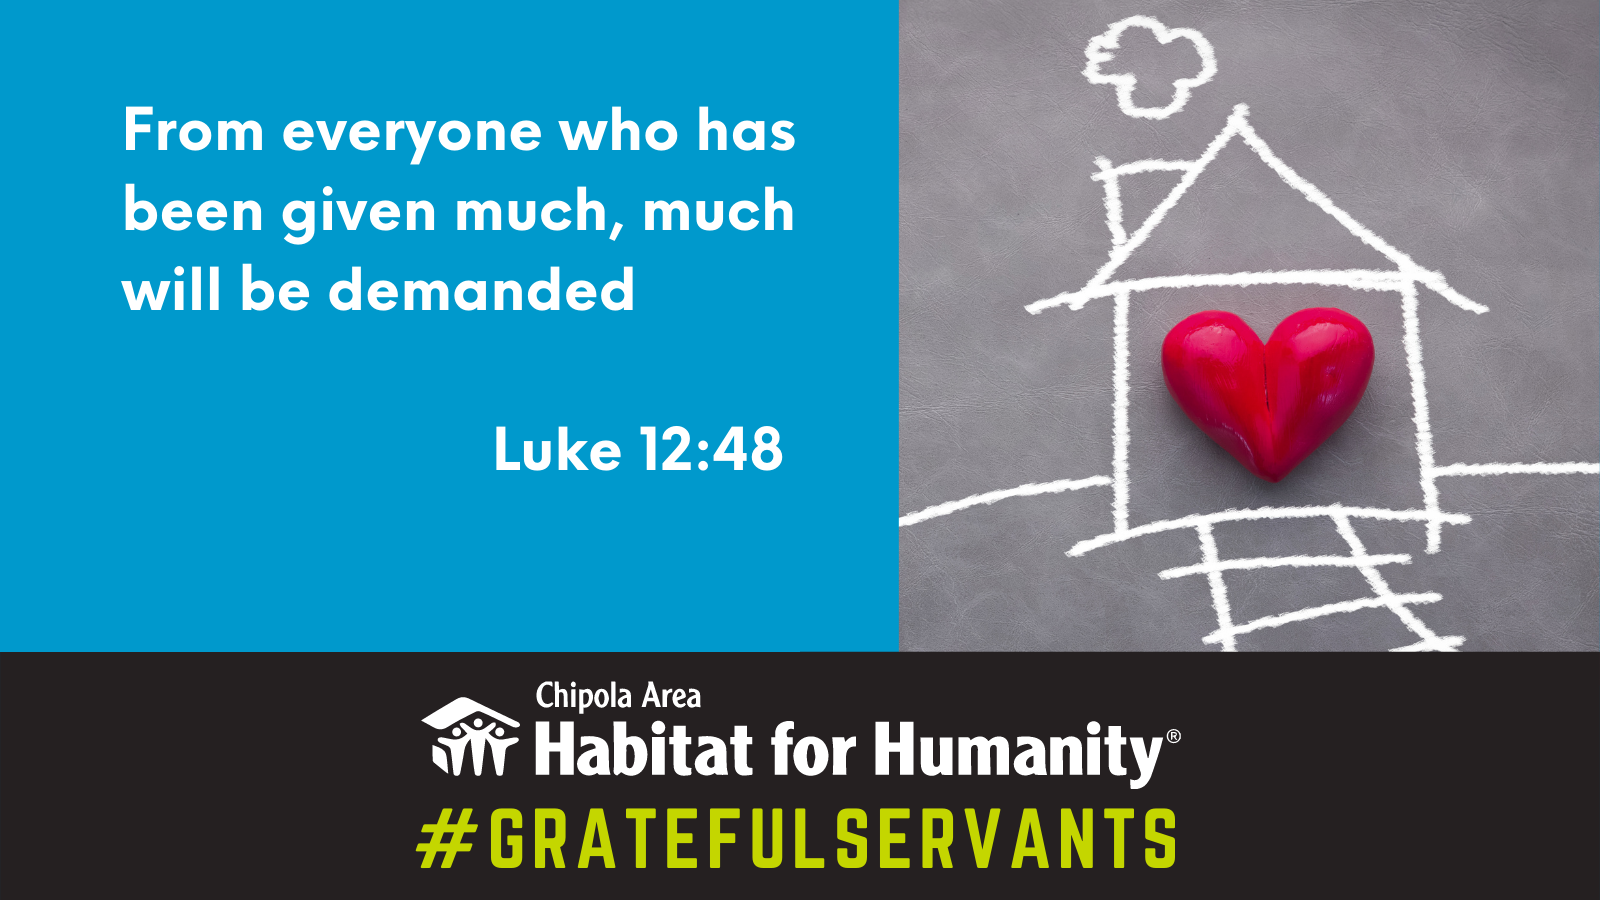 Image of a house drawn in chalk. In the center of the house is a read heart. Text: From everyone who has been given much, much will be demanded Luke 12:48. Chipola Area Habitat for Humanity logo. Text: #GratefulServants.